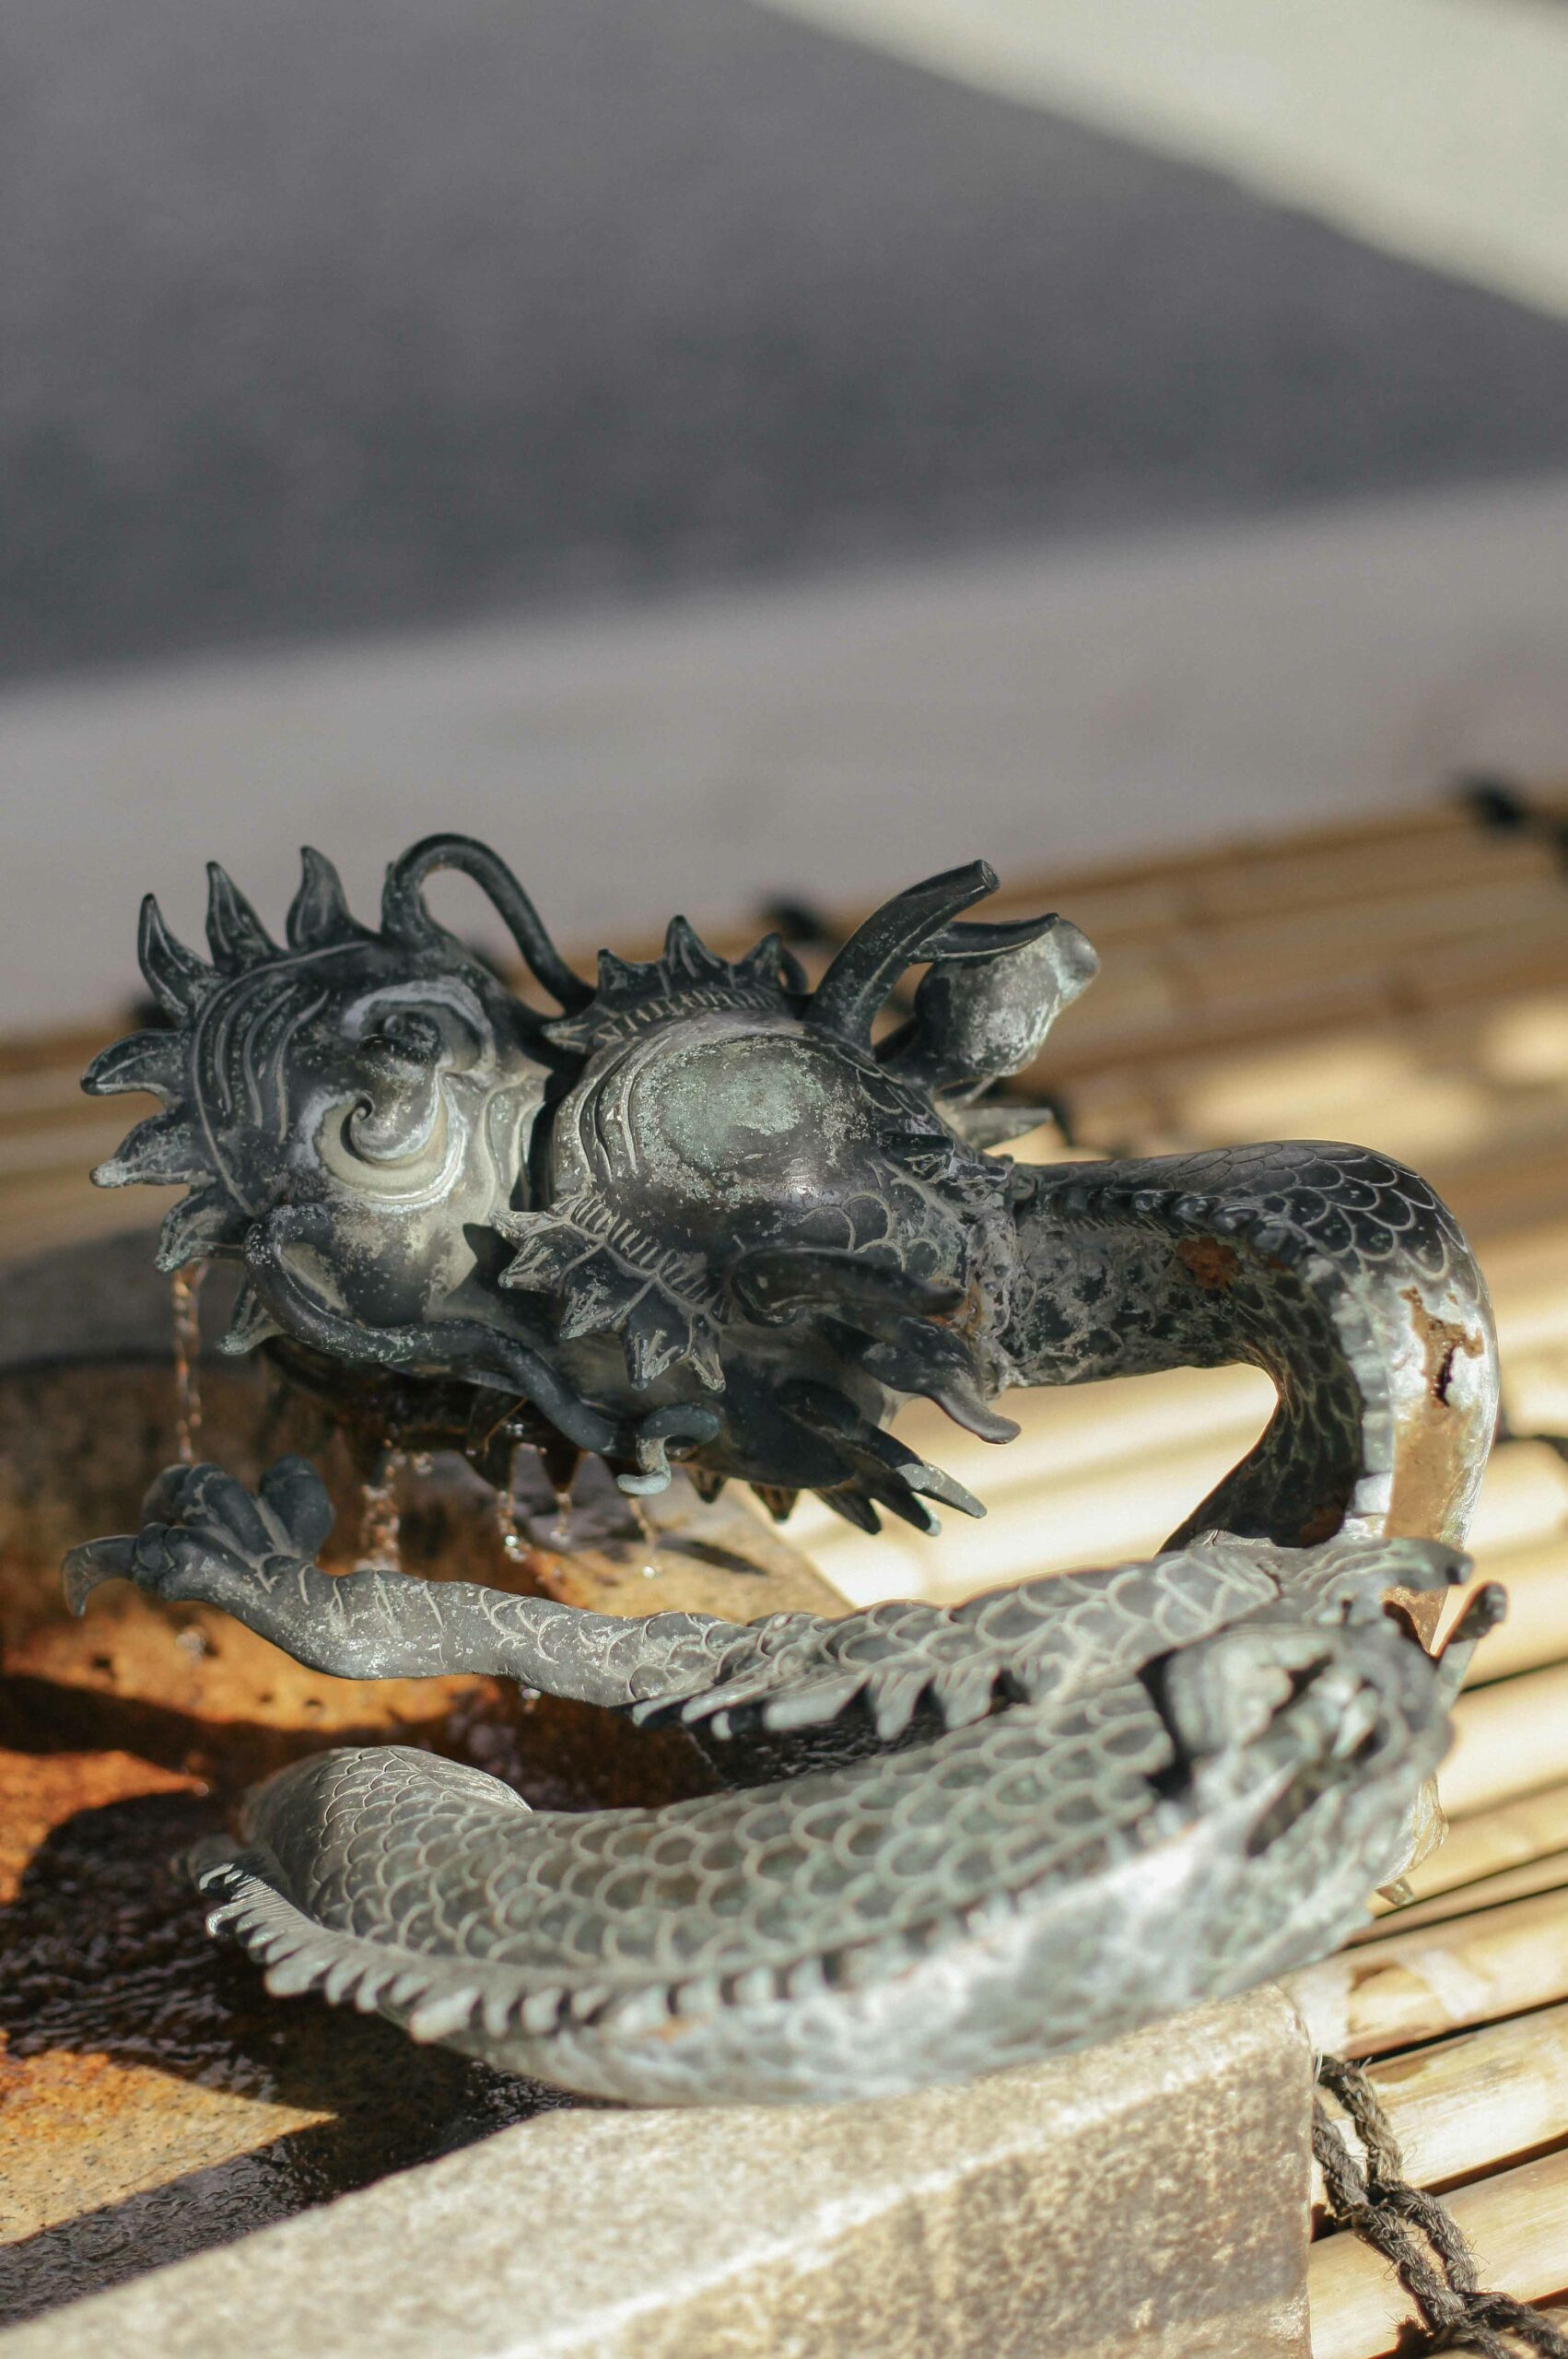 The temple courtyard at Nishi Hongan-ji is home to a cleansing basin guarded by a bearded dragon.